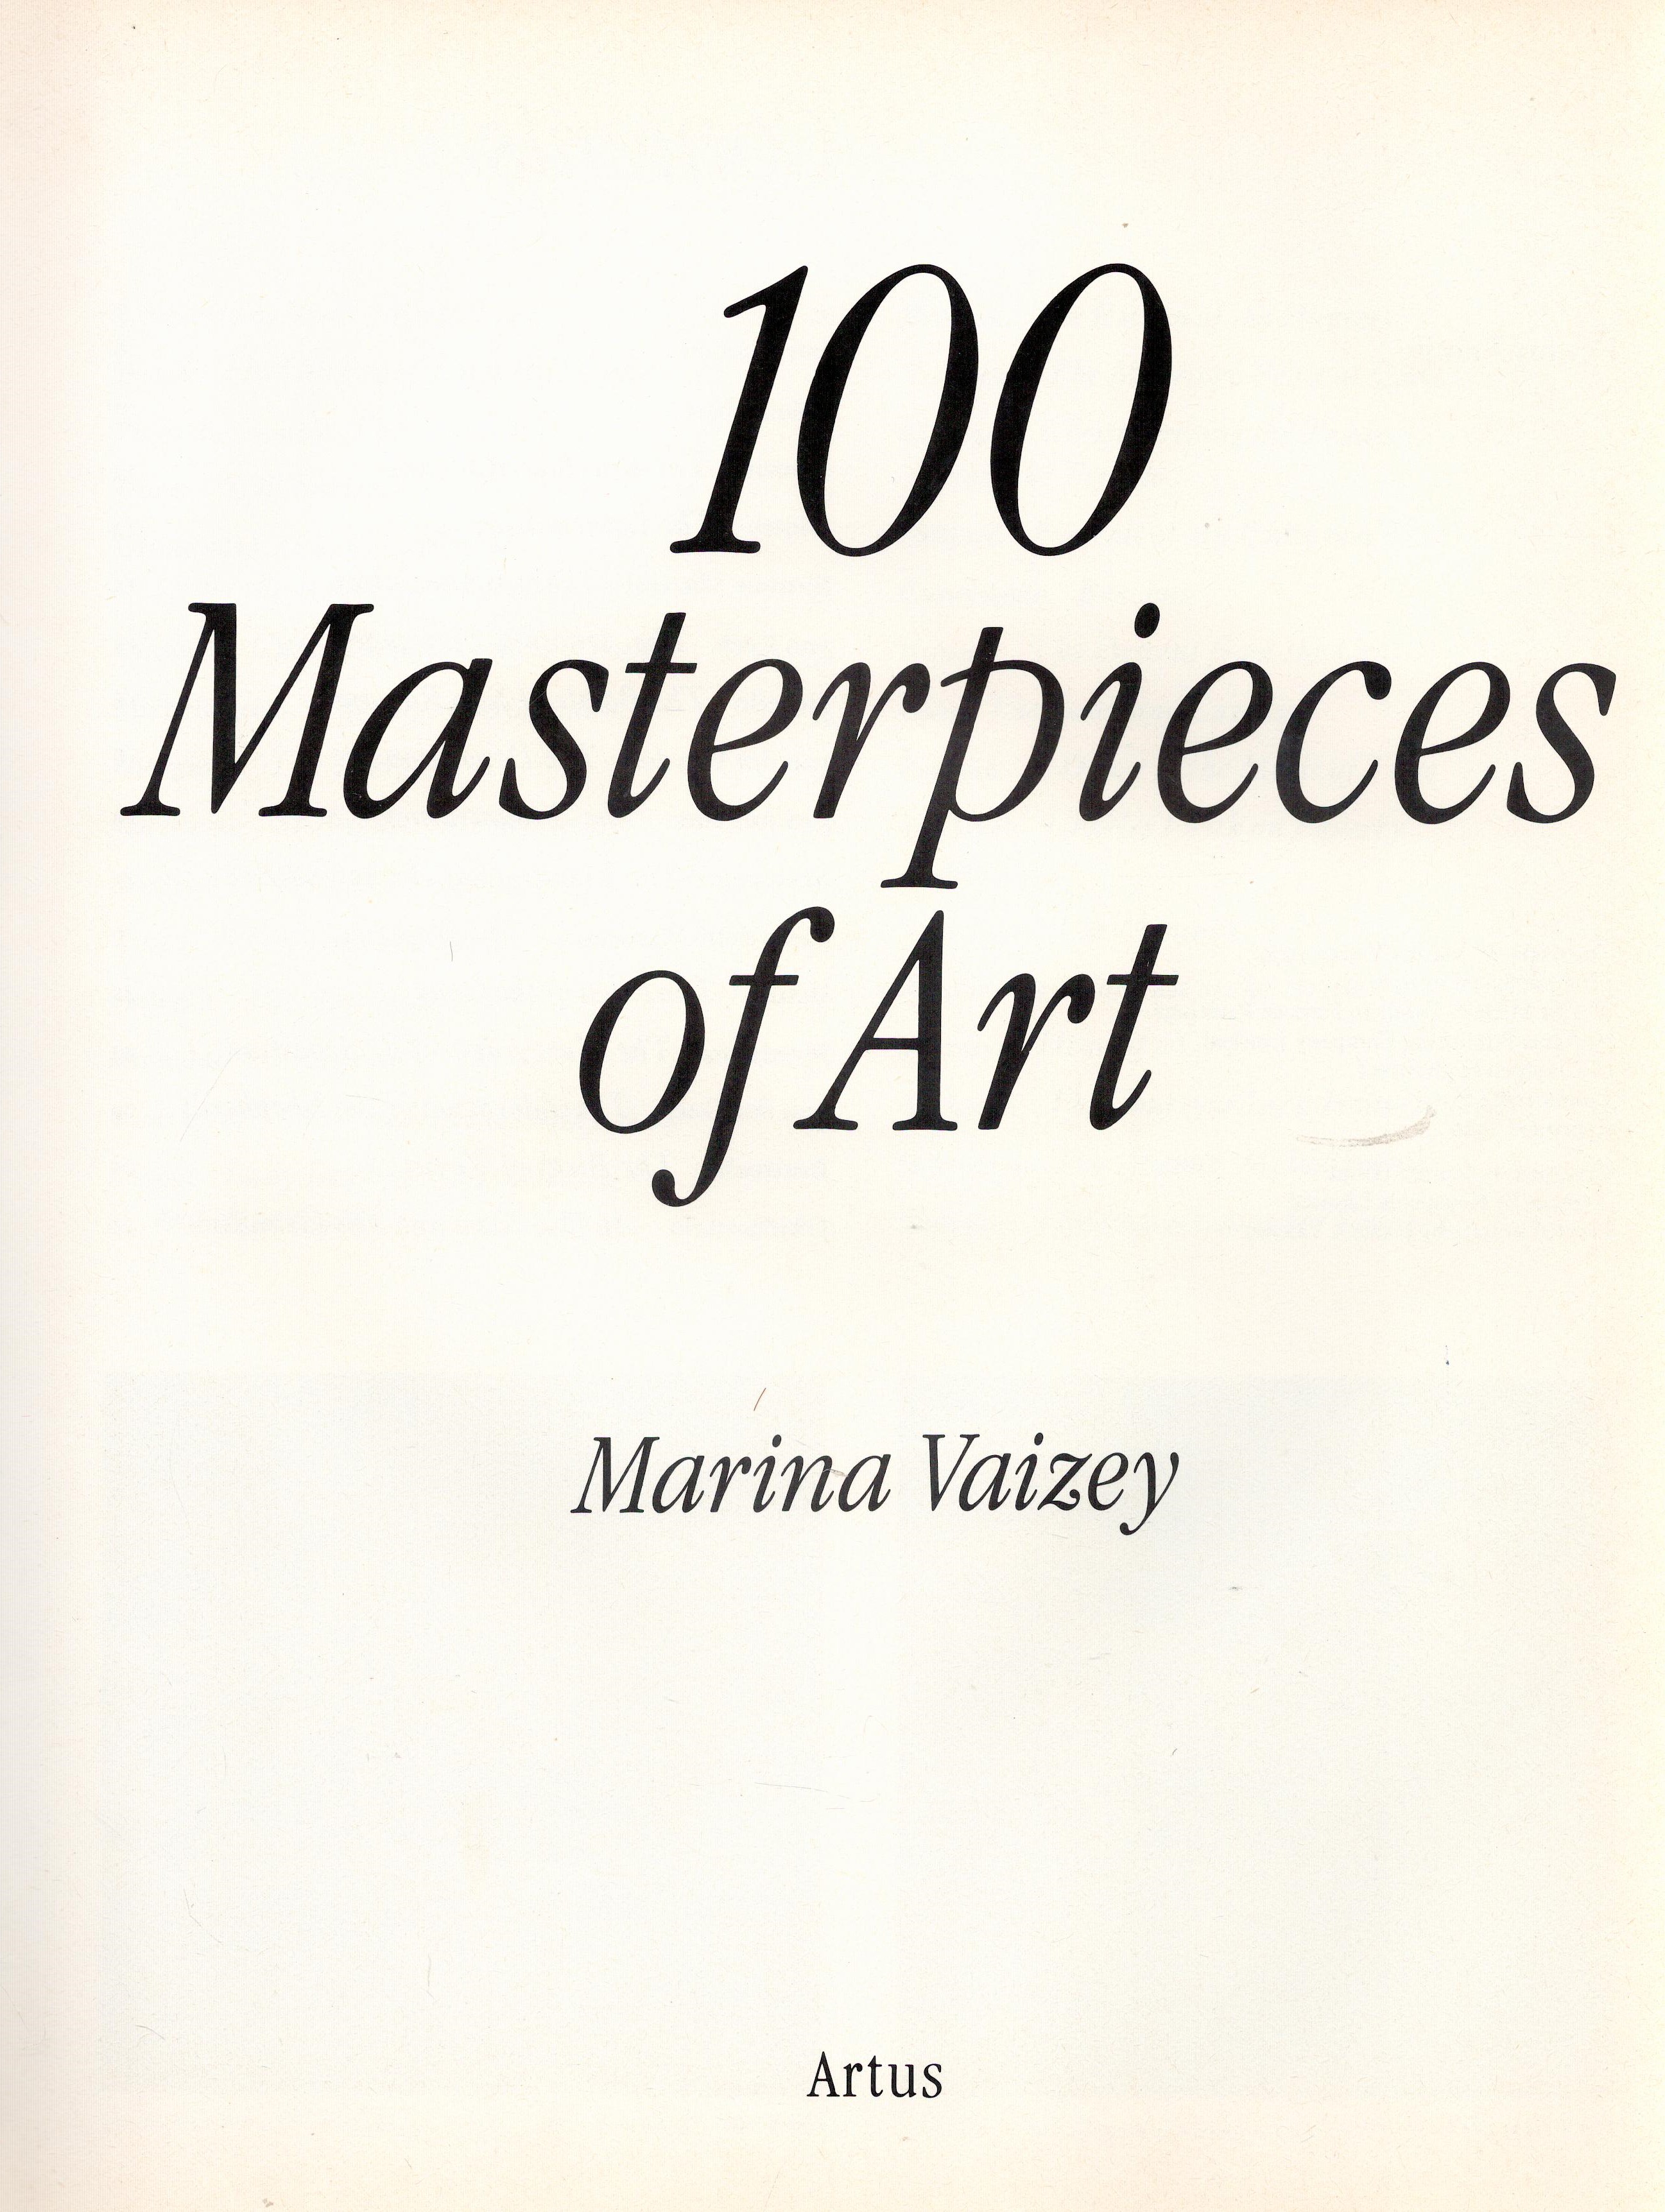 100 Masterpieces of Art by Marina Vaizey Hardback Book 1980 Second Edition published by Artus - Image 2 of 3